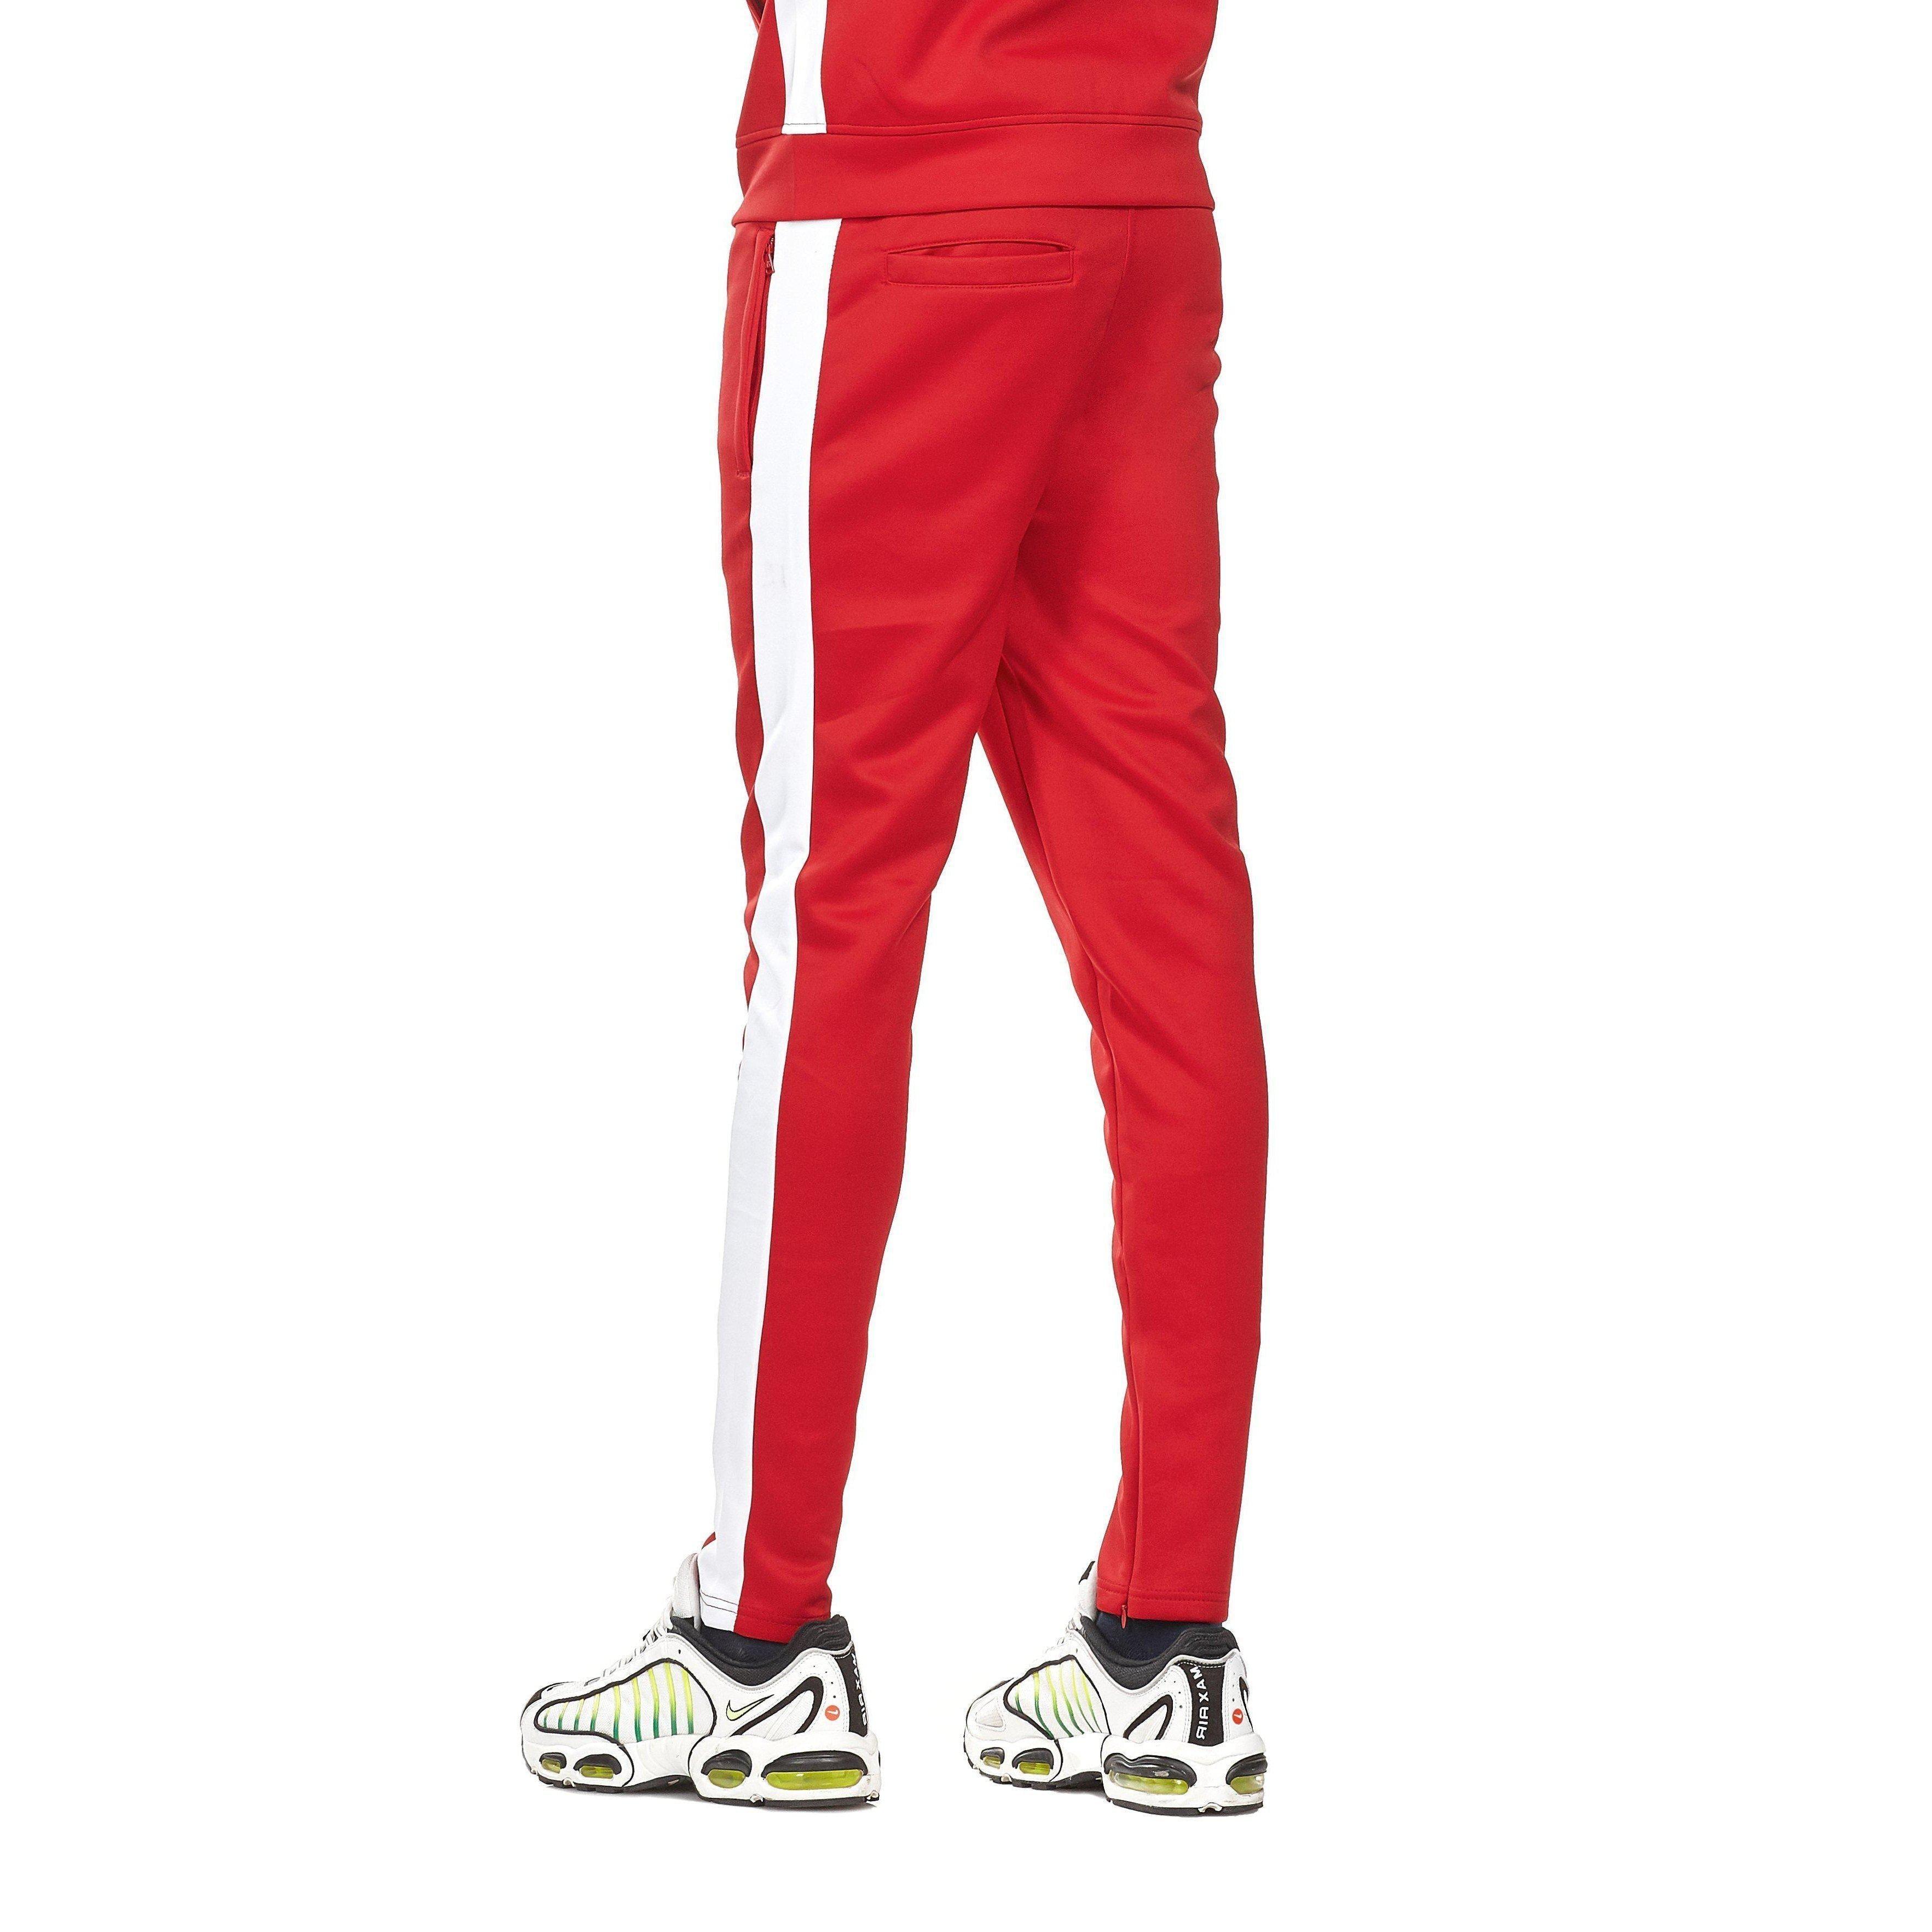 Track Pants - Red & White - Rebel Minds